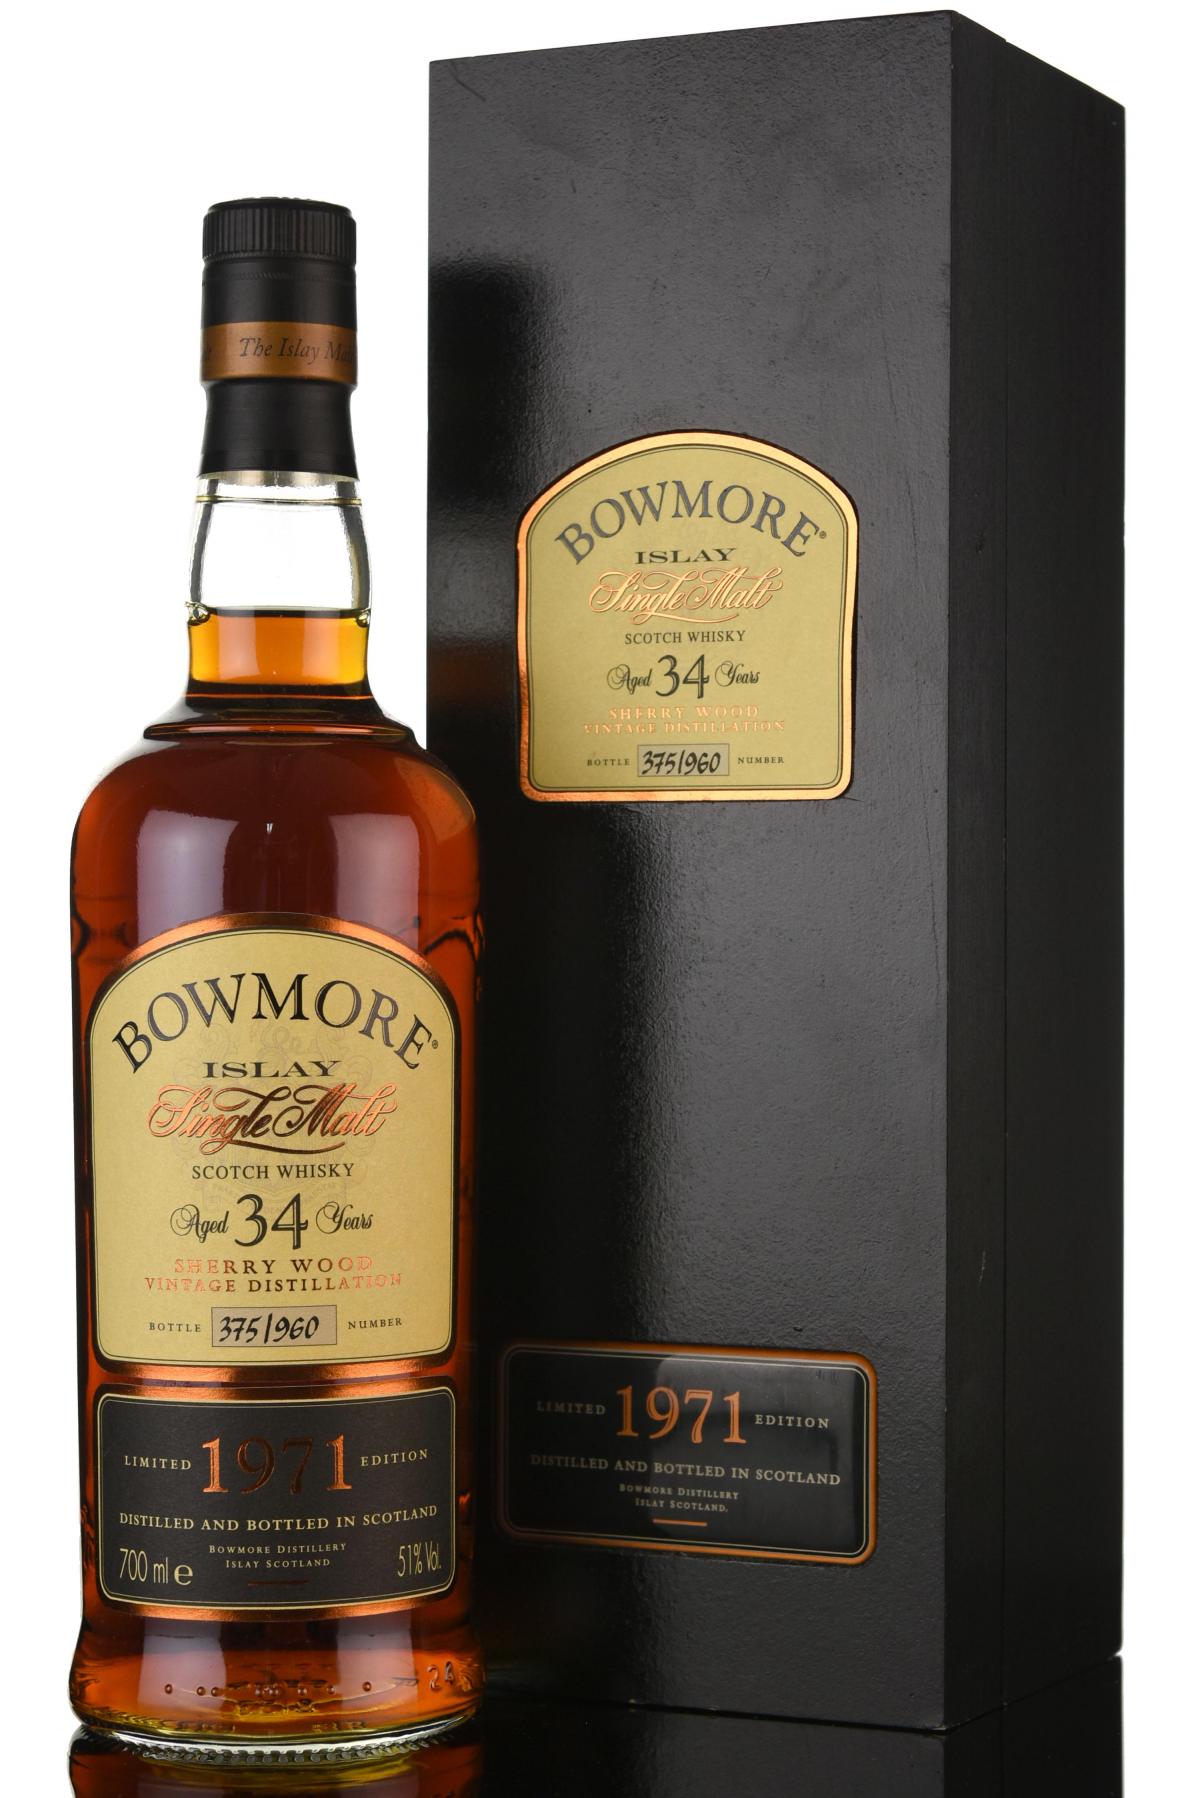 Bowmore 1971 - 34 Year Old